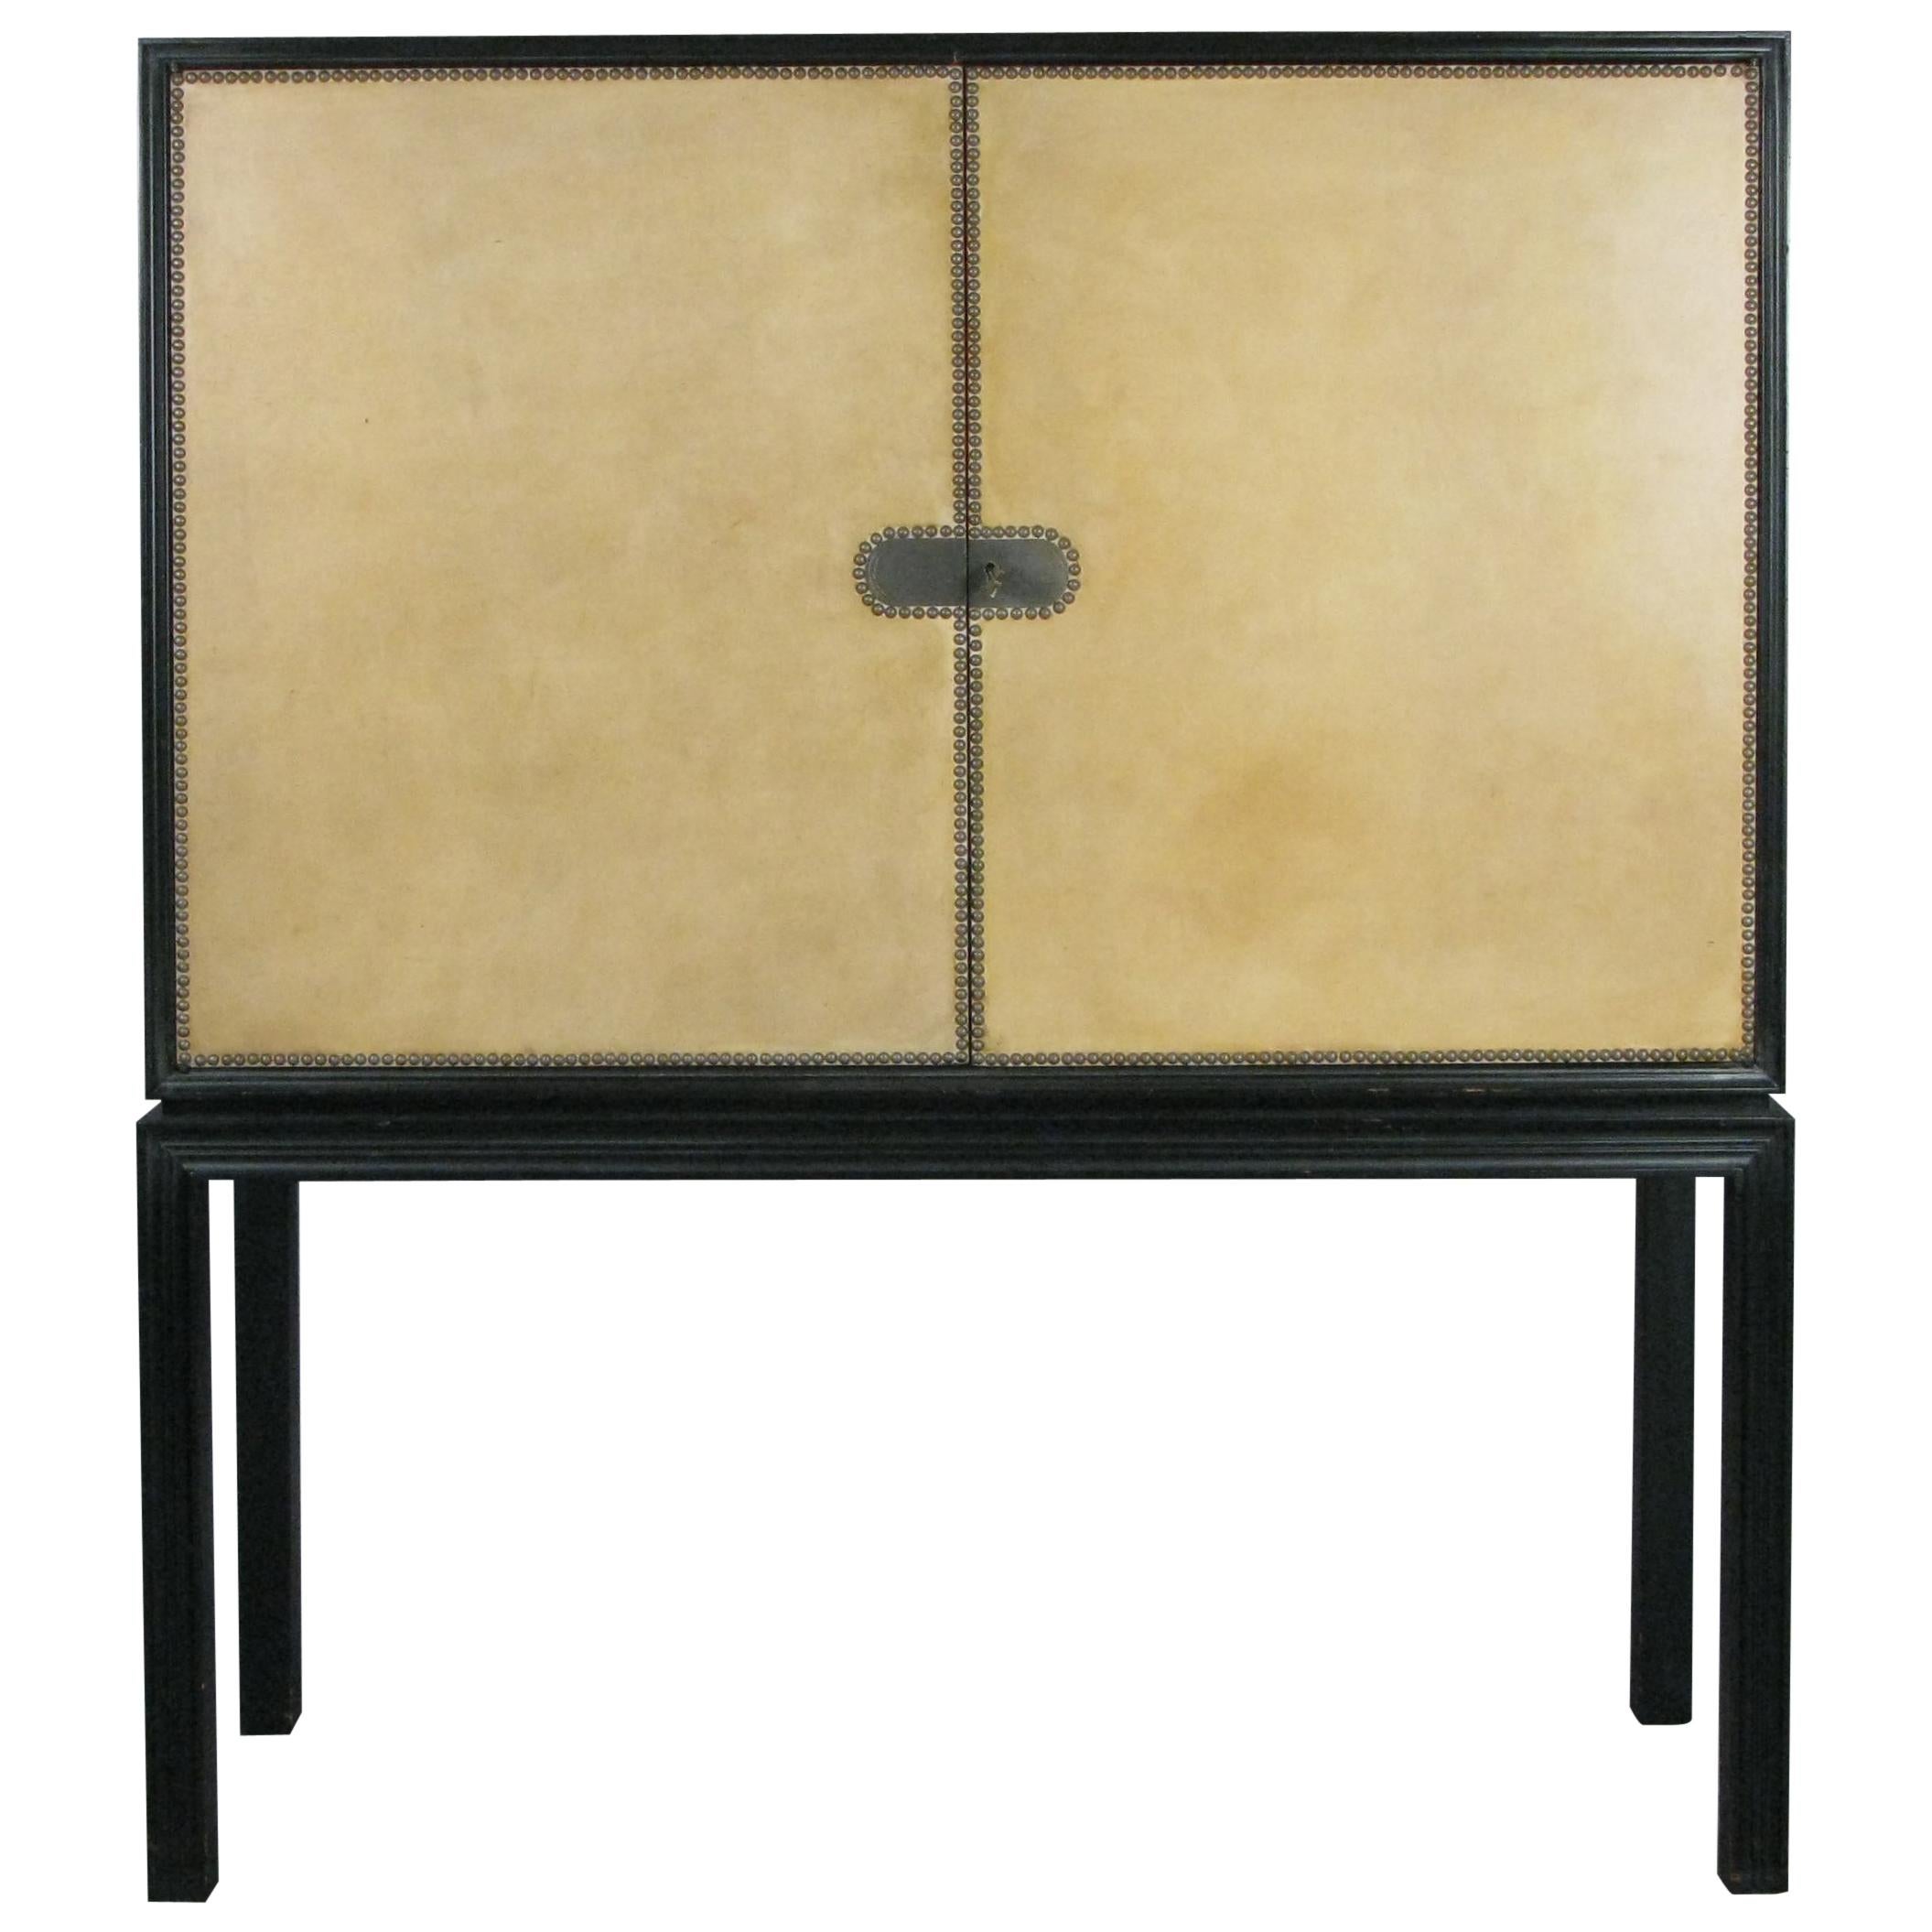 A very elegant and handsome late 1940s lacquered mahogany bar cabinet designed by Tommi Parzinger for Charak Modern. Raised on tall legs with molded detail, the doors have cream colored leather with nailhead trim detail. The center with bronze